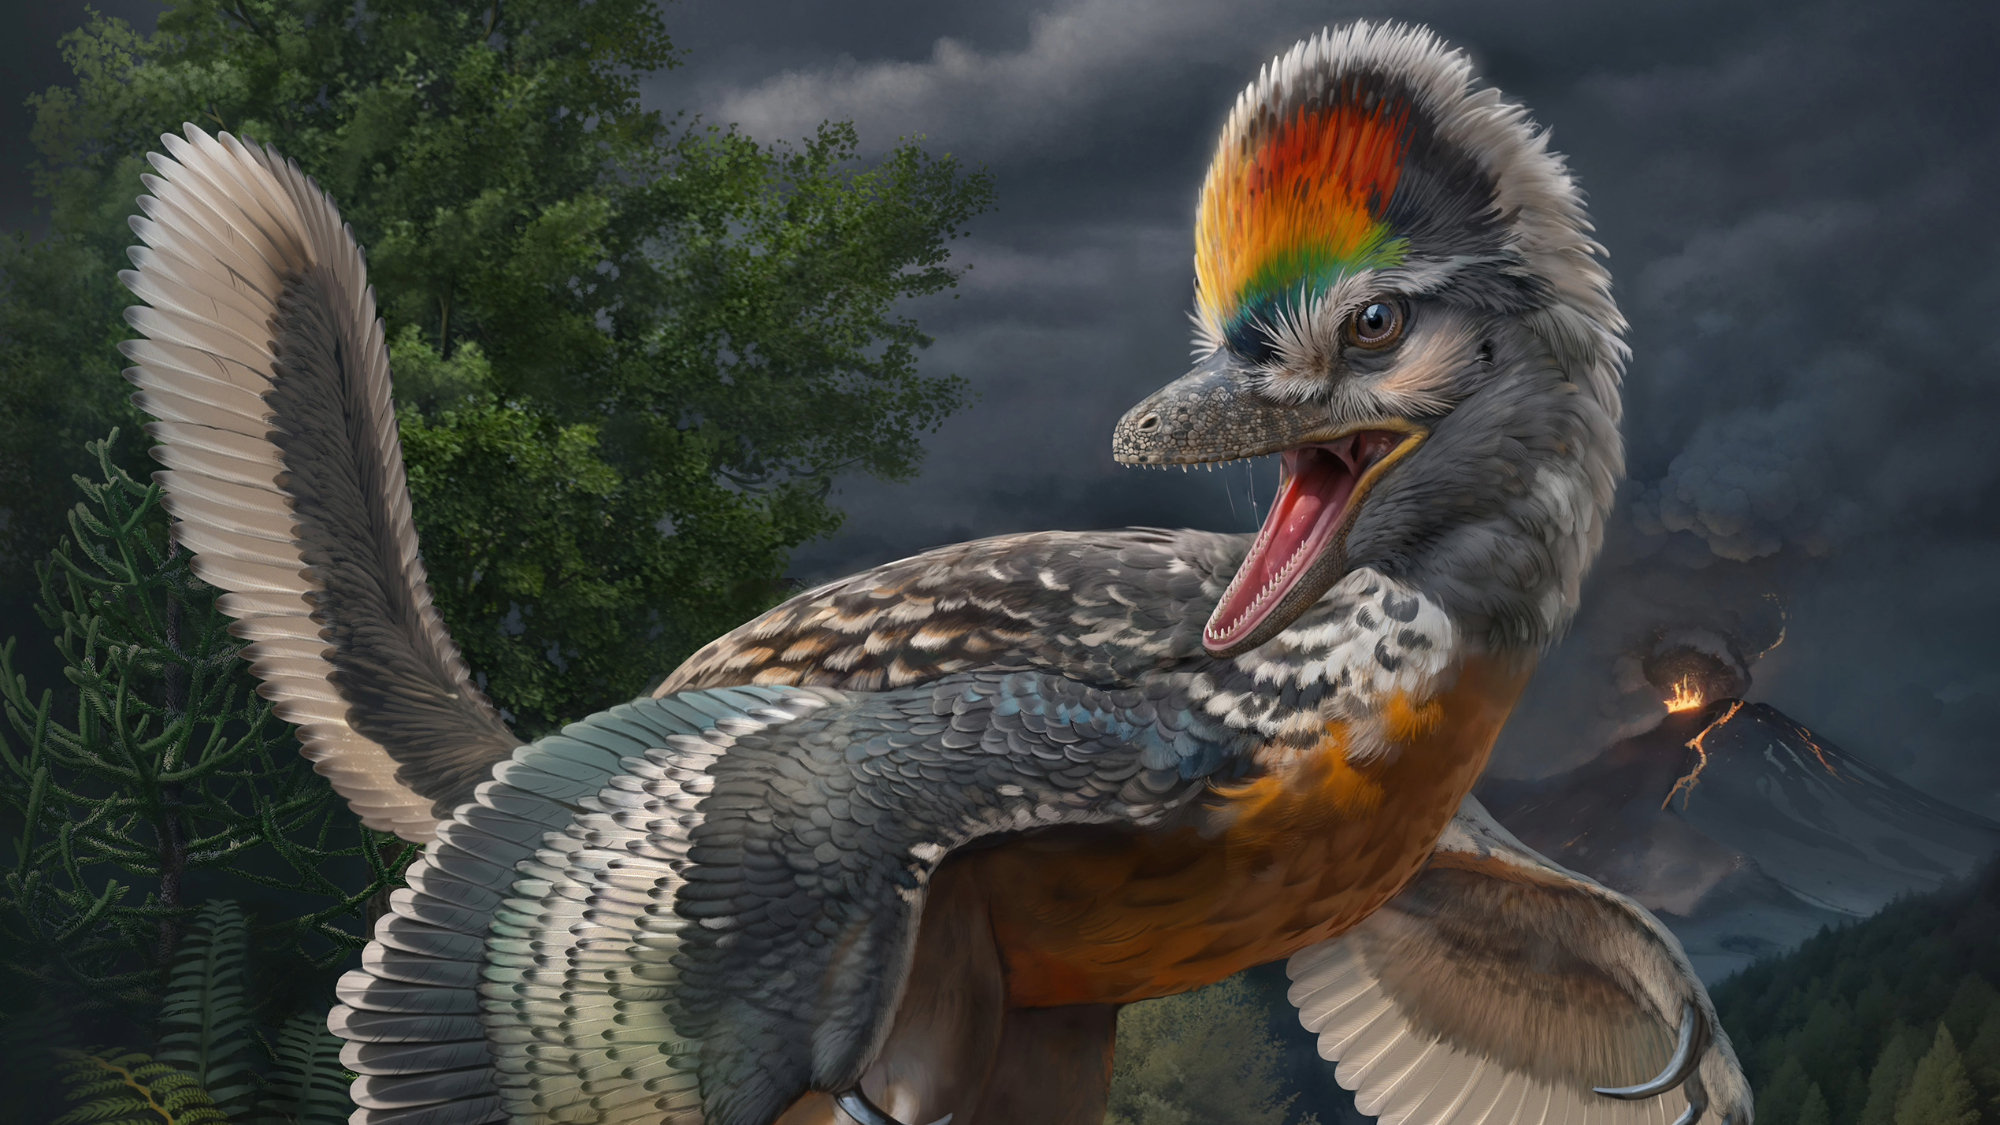 Leggy dinosaur species could be the latest feathery clue to bird evolution